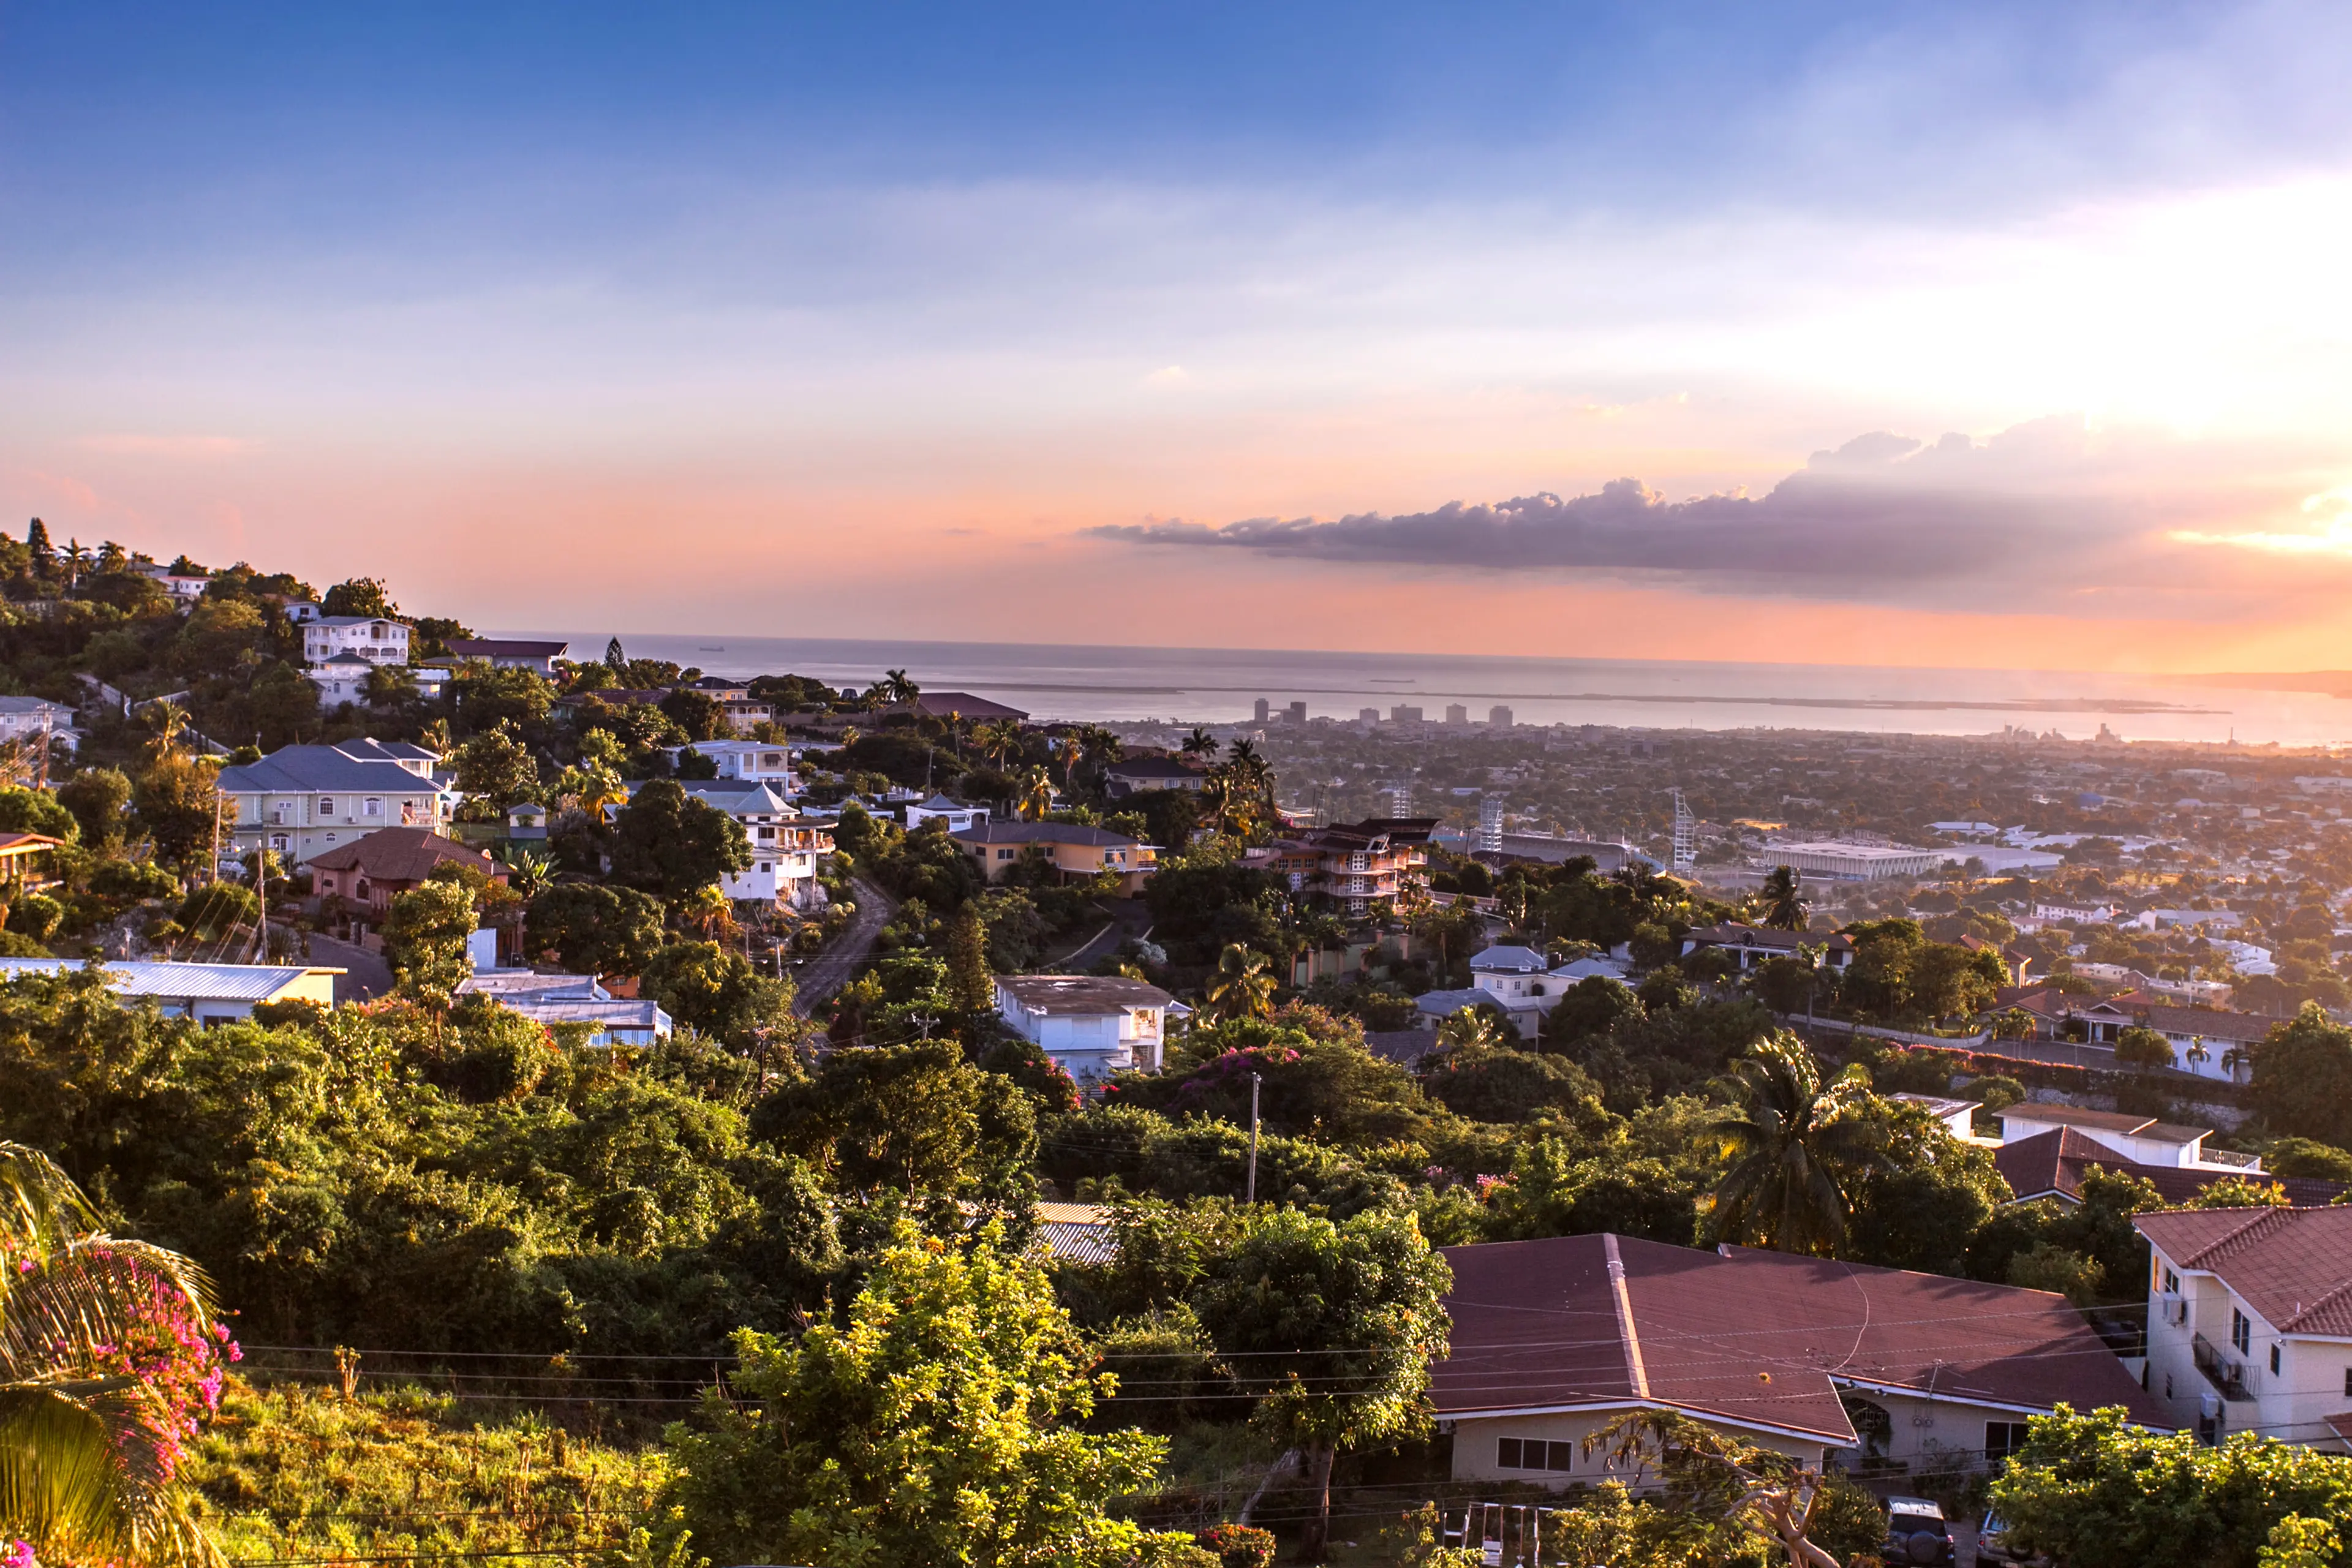 Explore Kingston, Jamaica in One Unforgettable Day